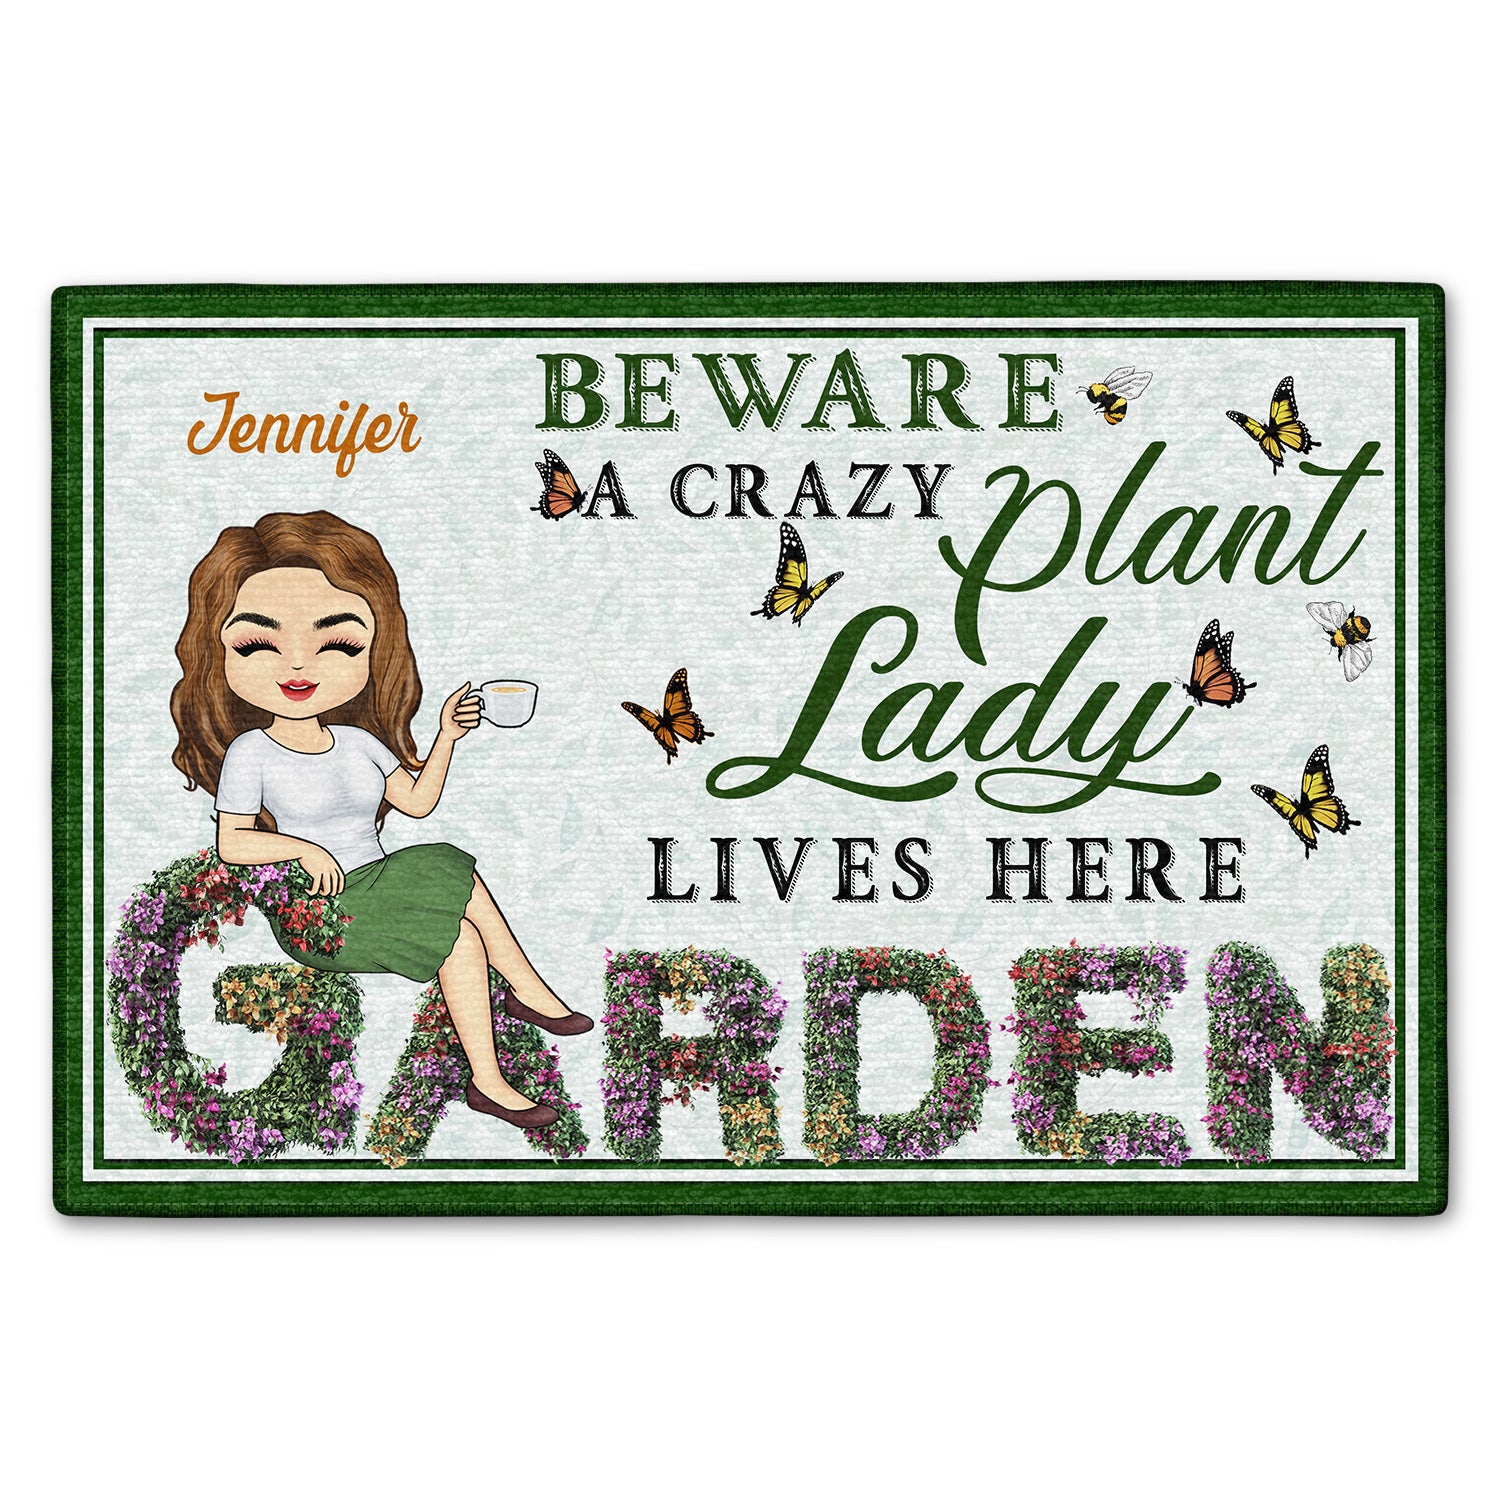 And Into The Garden I Go - Beware A Crazy Plant Lady Lives Here - Birthday, Housewarming Gift For Her, Him, Gardener, Outdoor Decor - Personalized Custom Doormat